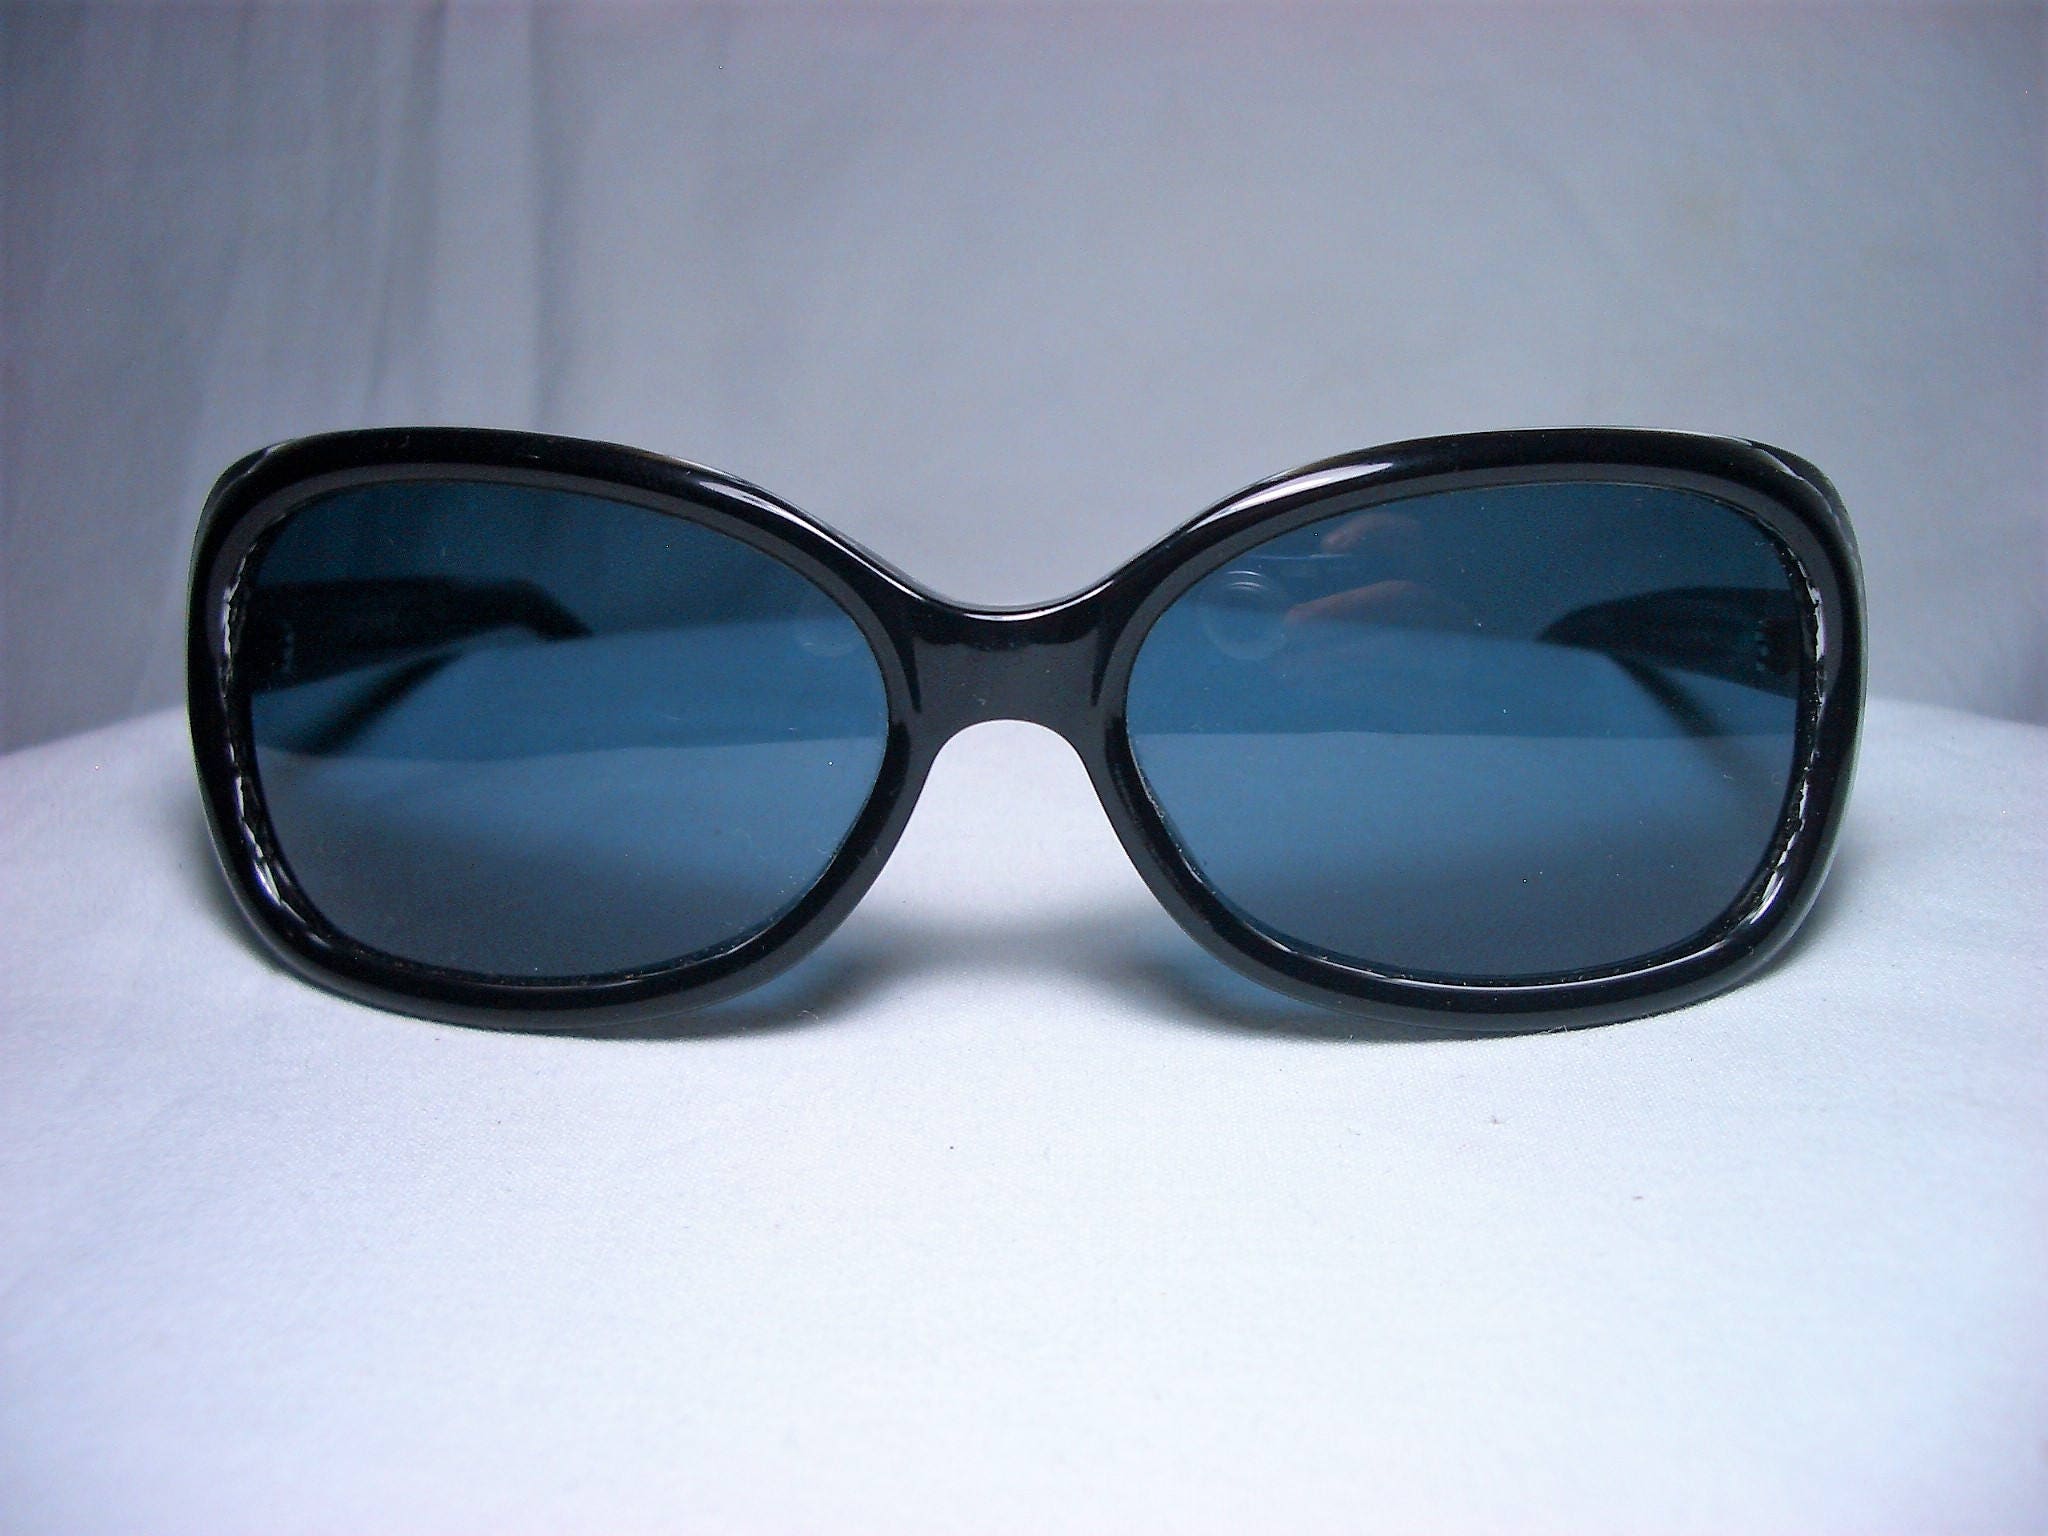 vaccination Munk foragte Jones New York Sunglasses Jackie-o Round Oval - Etsy